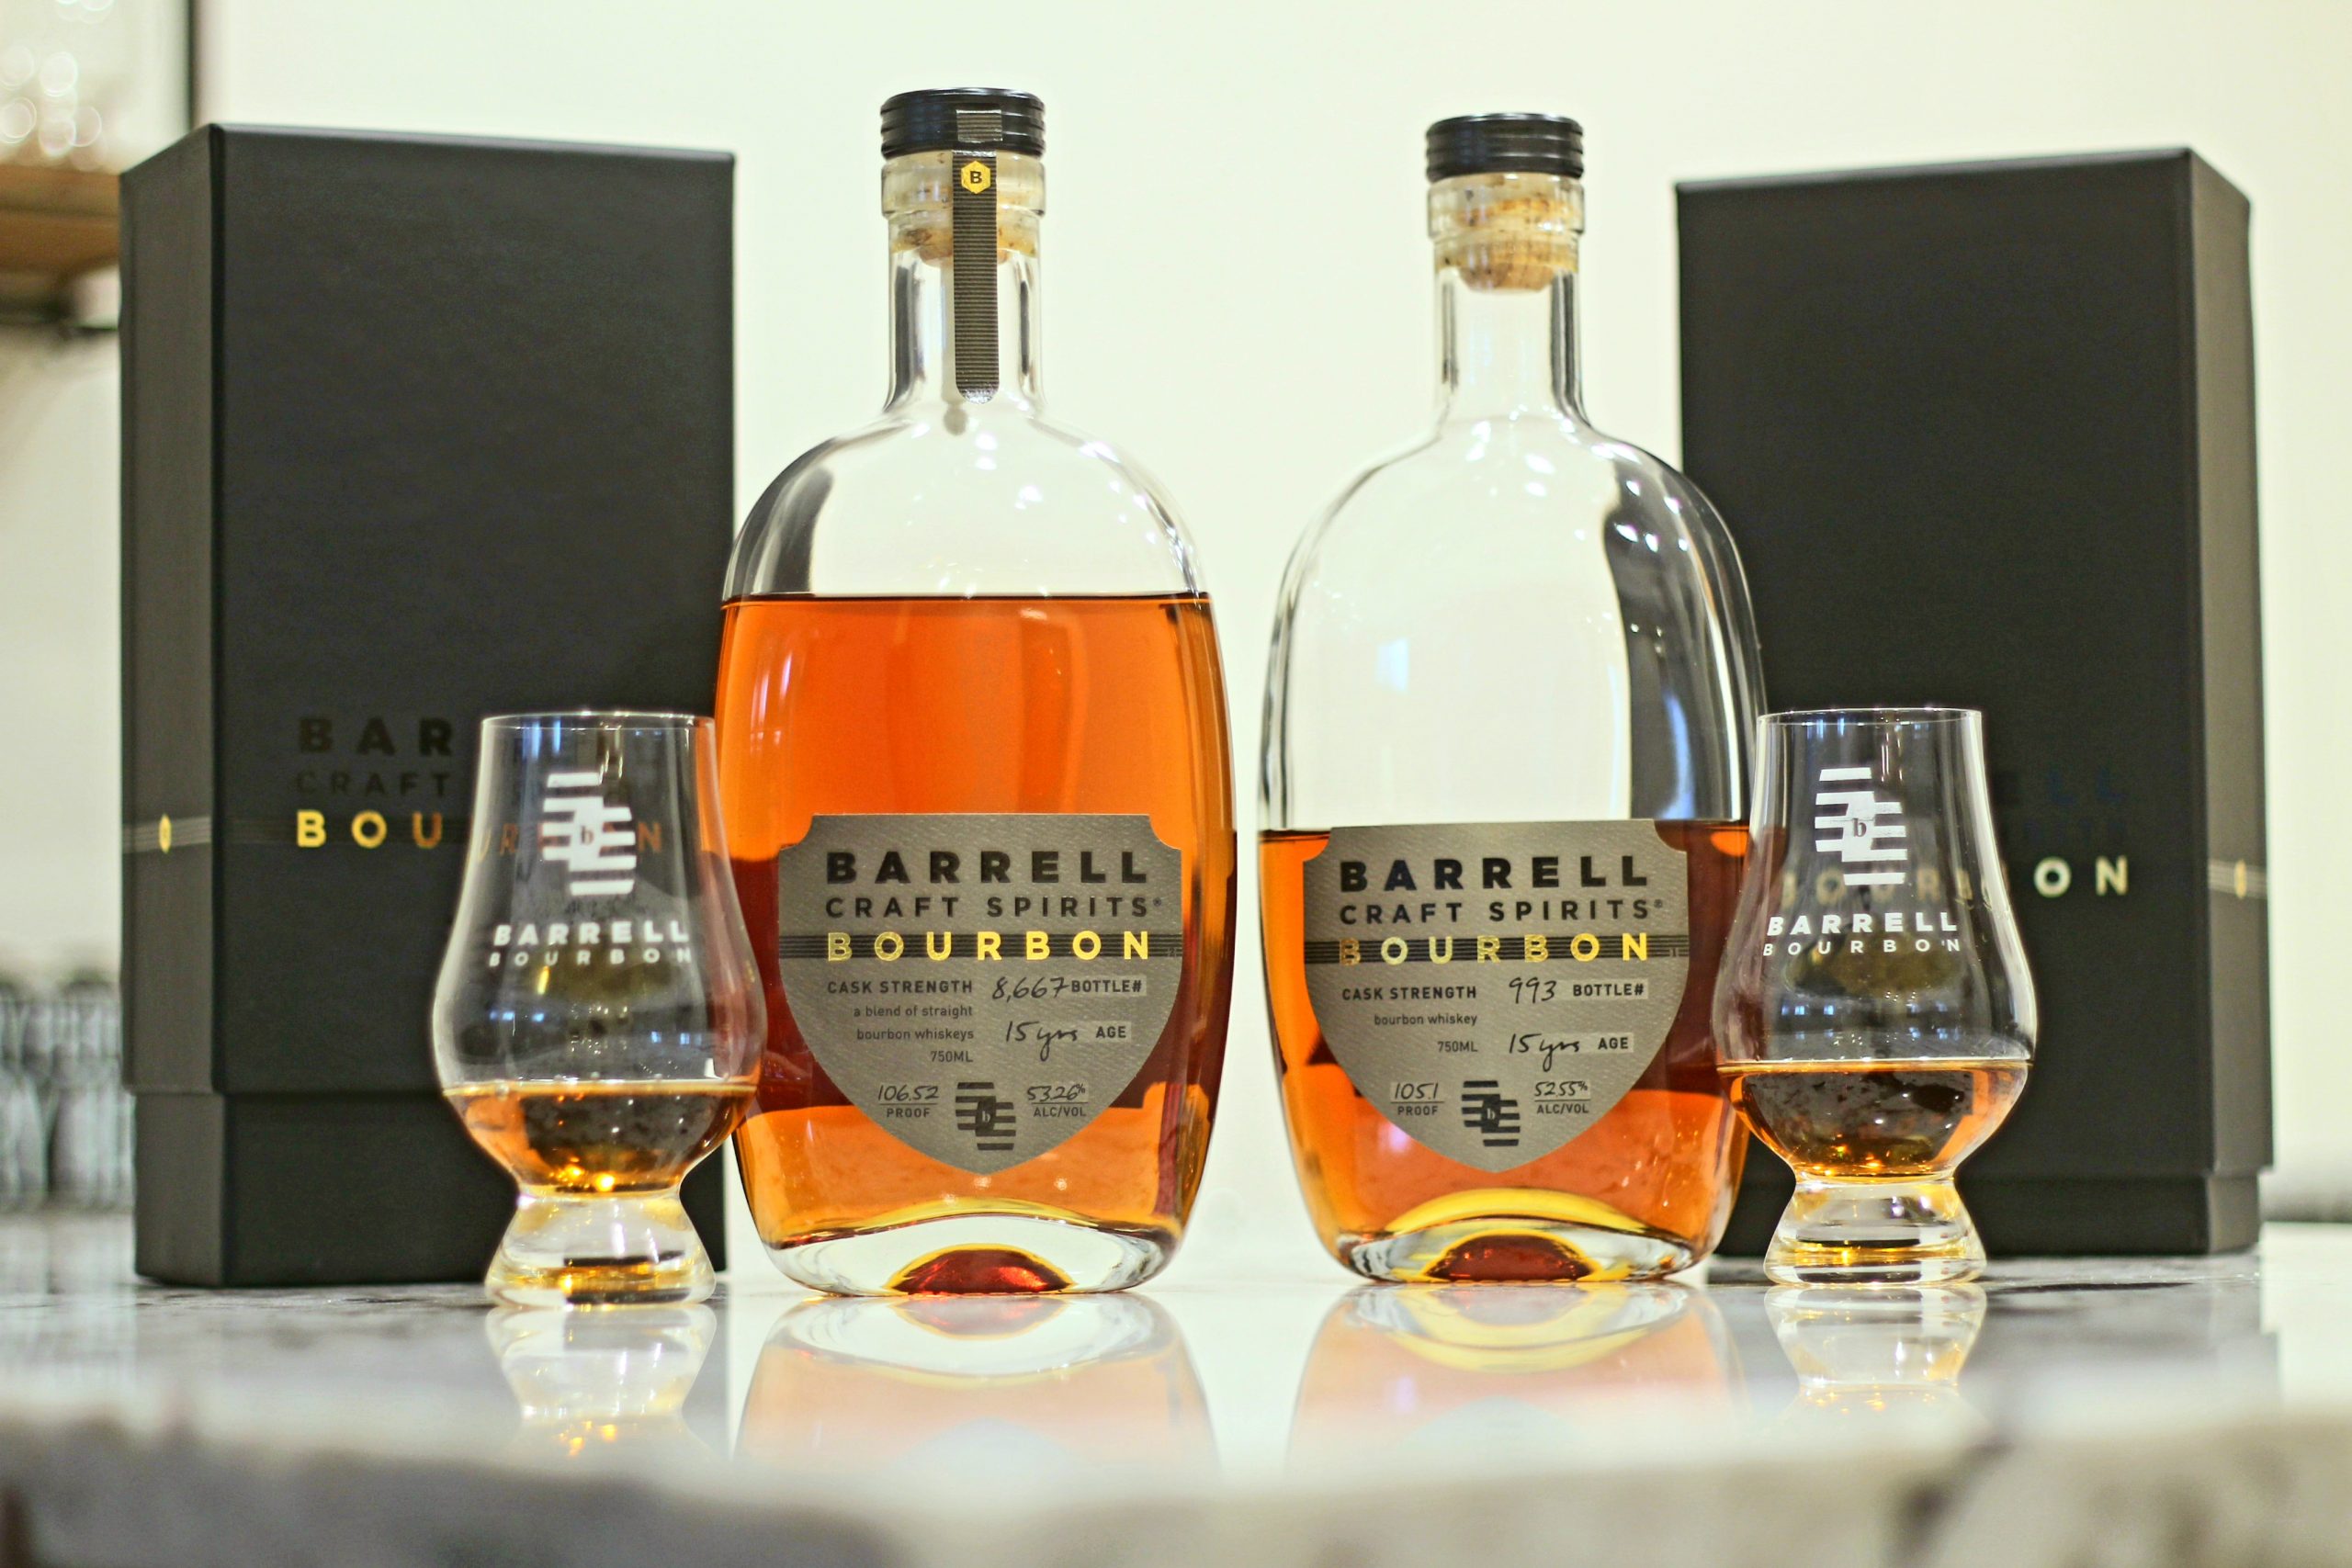 Barrell Craft Spirits 15 Year Bourbon Comparison (2018 Release vs 2019 Release) Joint Review